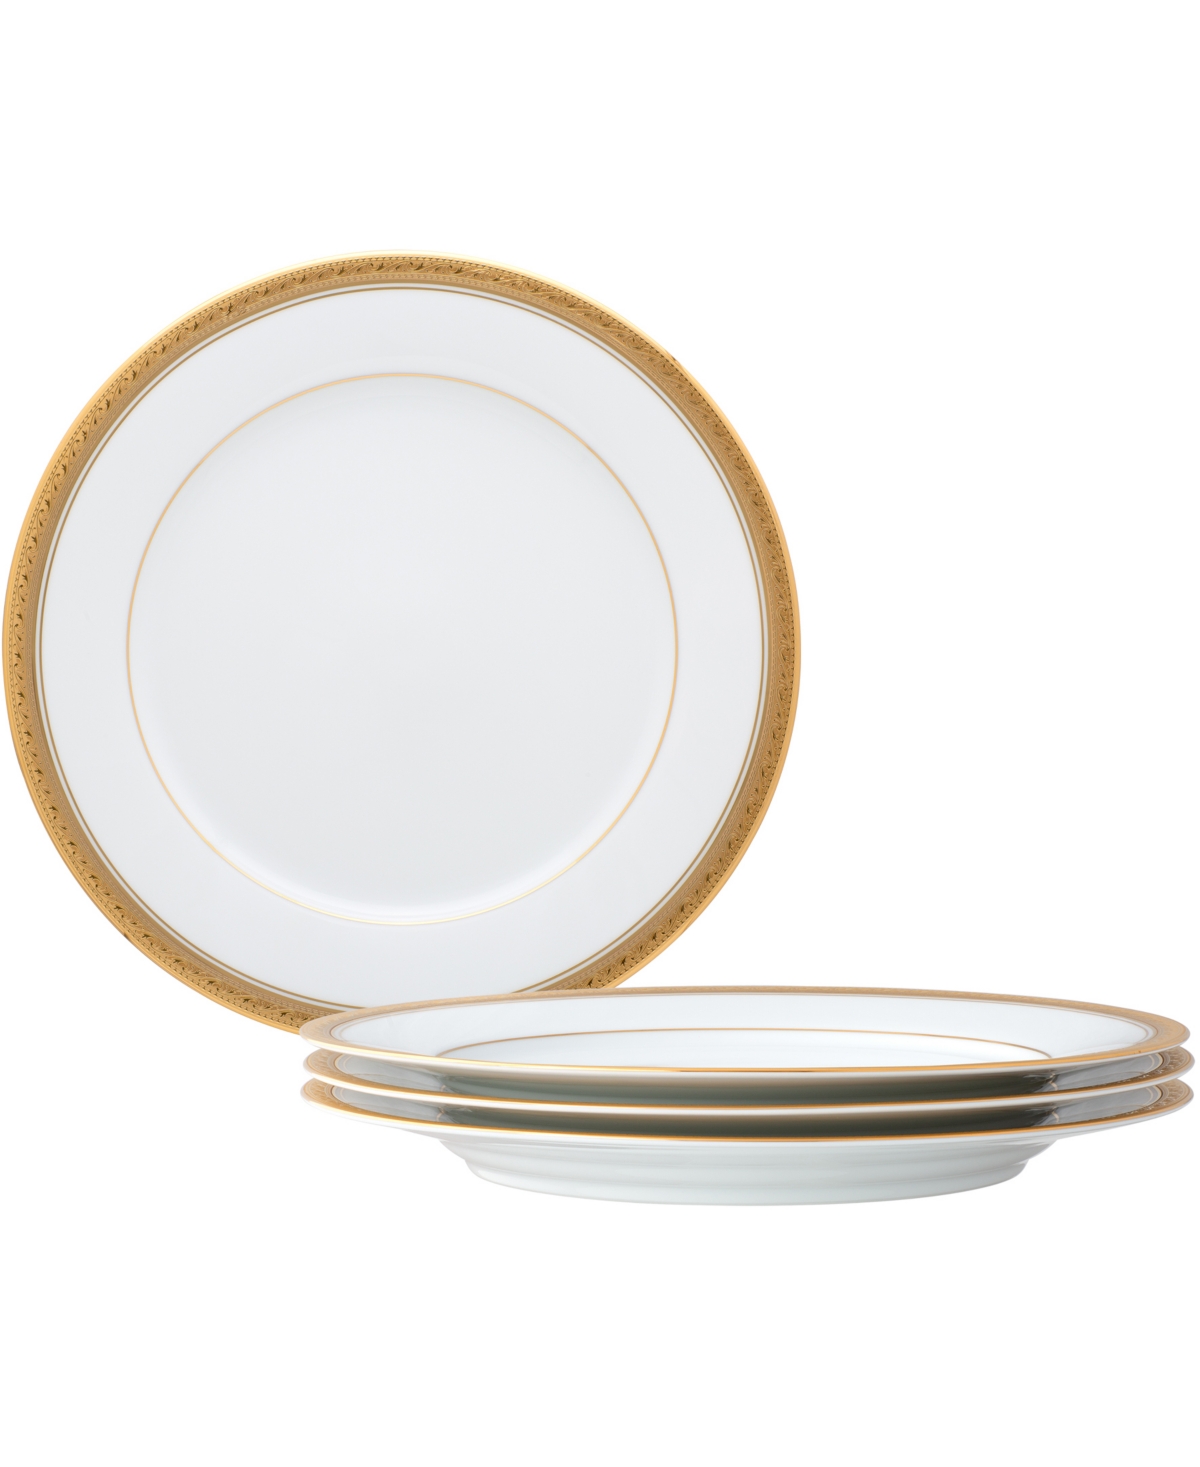 Noritake Crestwood Gold Set Of 4 Dinner Plates, Service For 4 In White